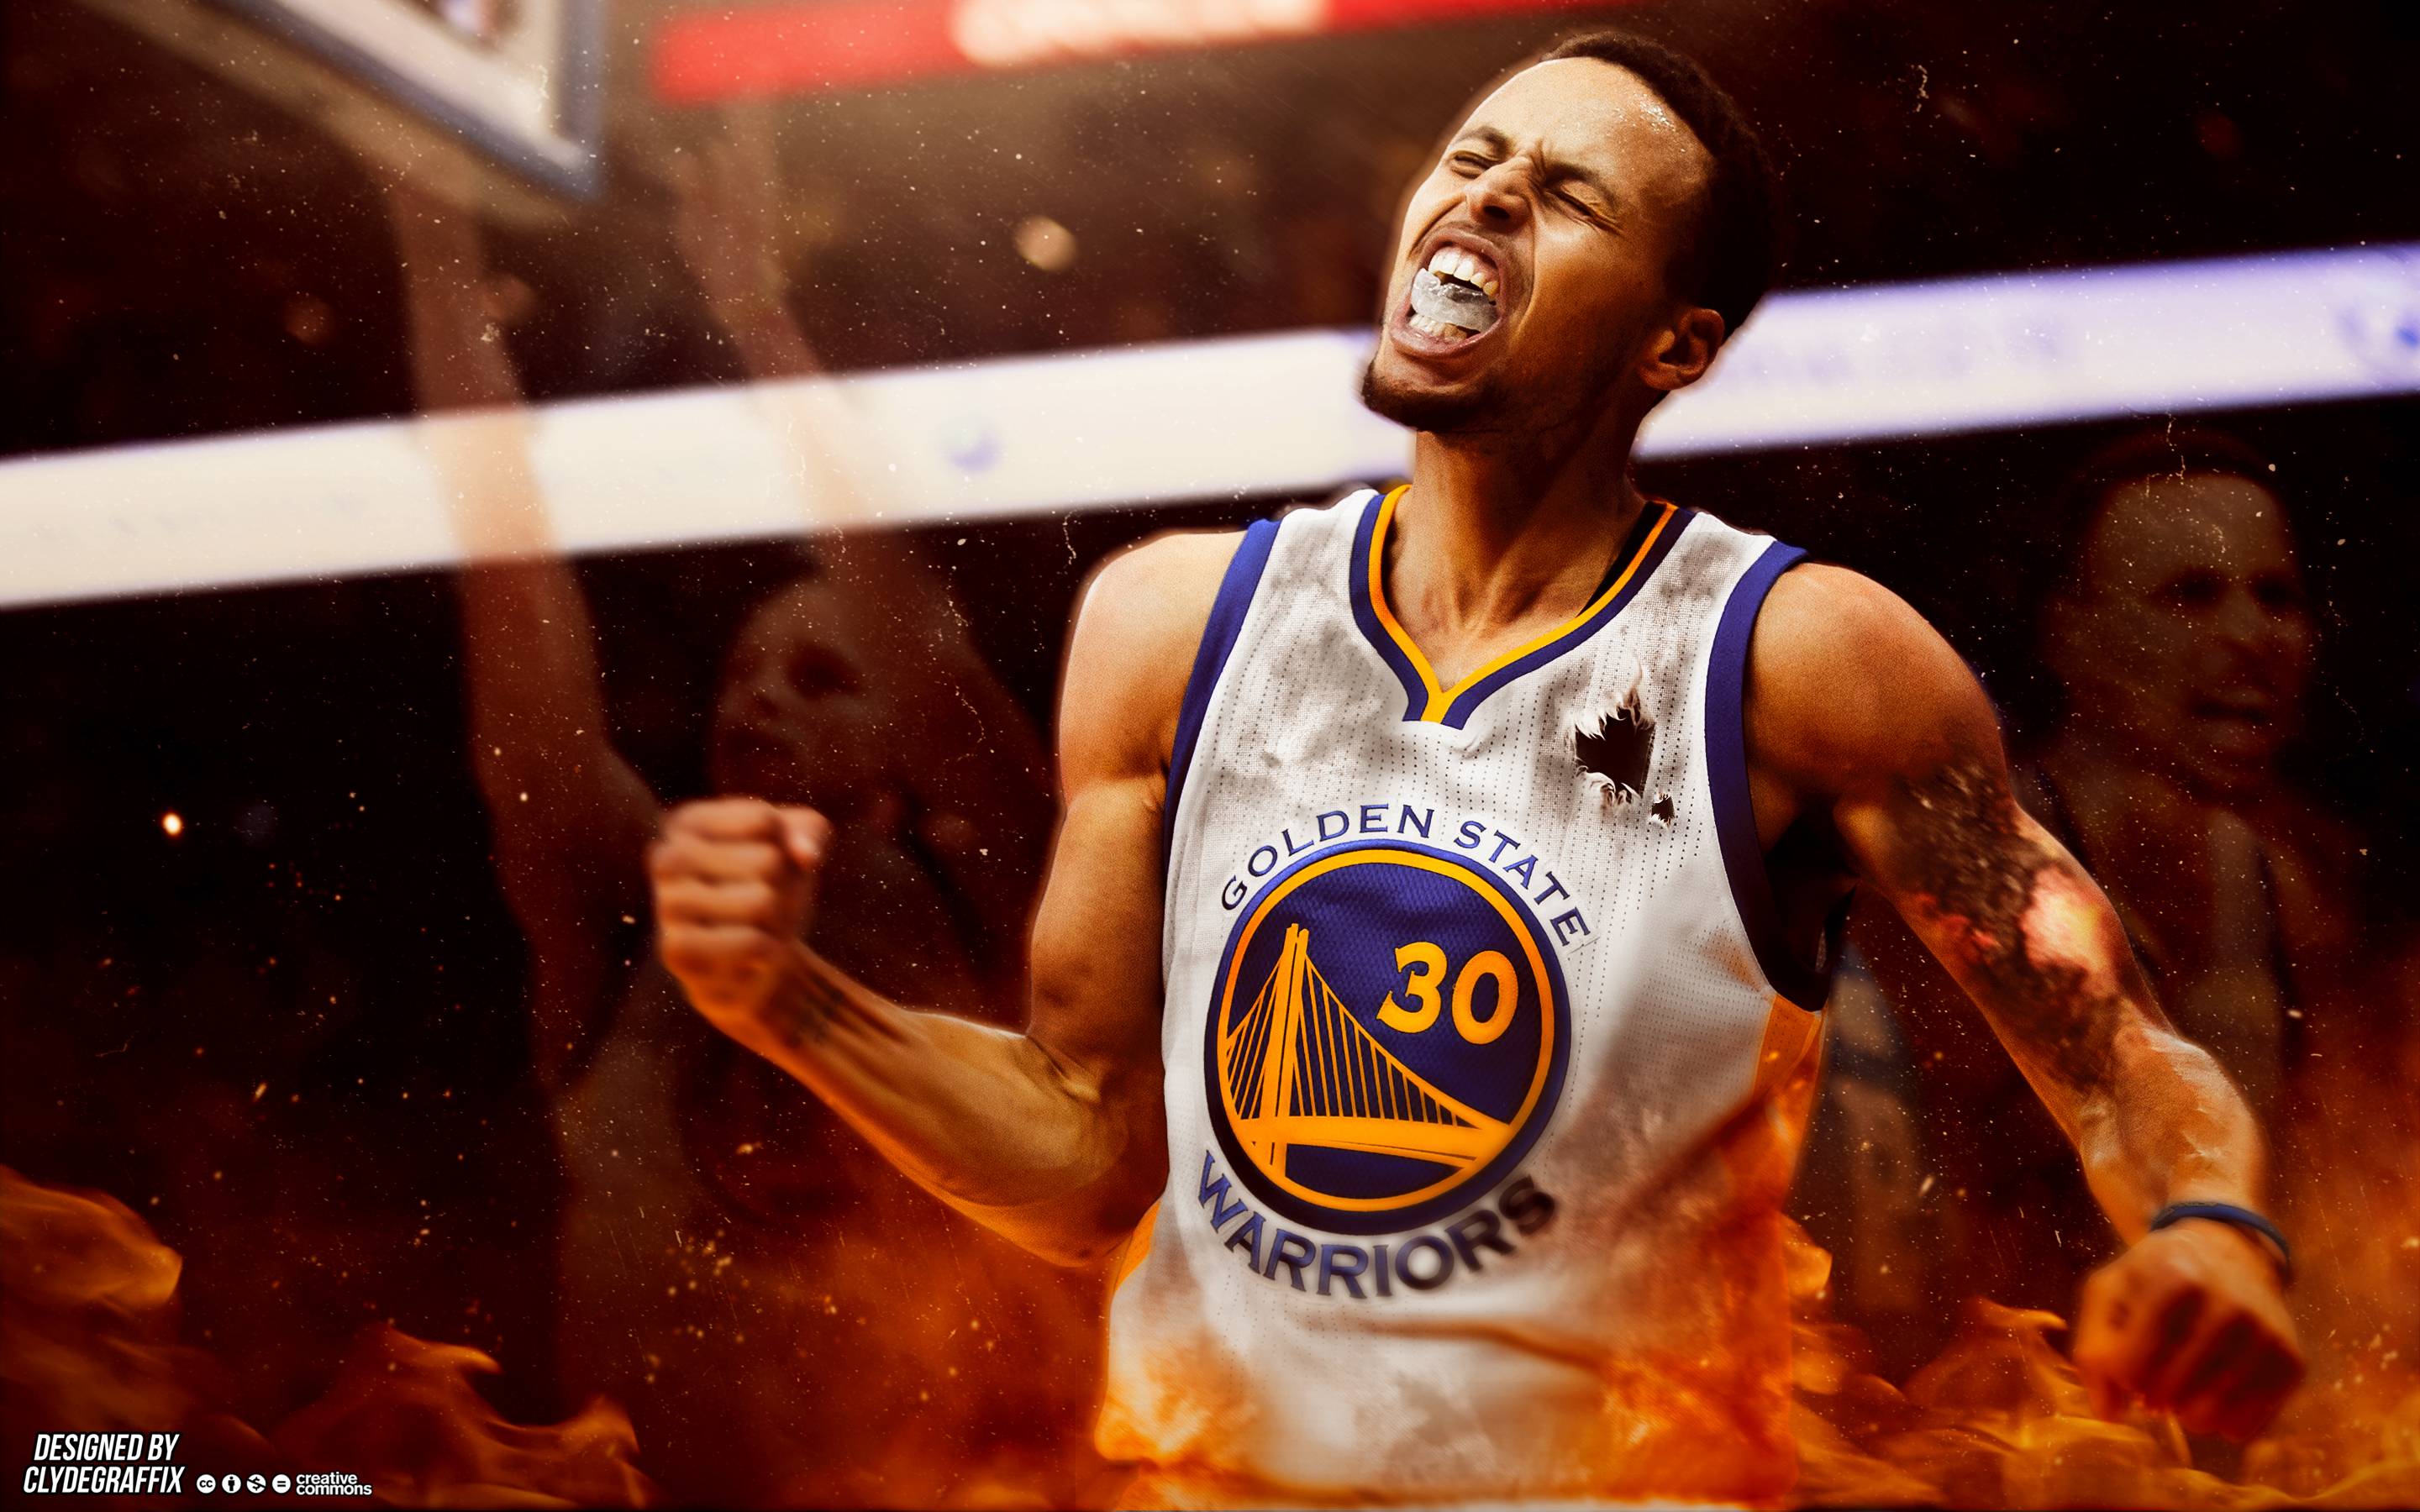 Steph Curry with the. Fire, boi? New wallpaper I made, hope you